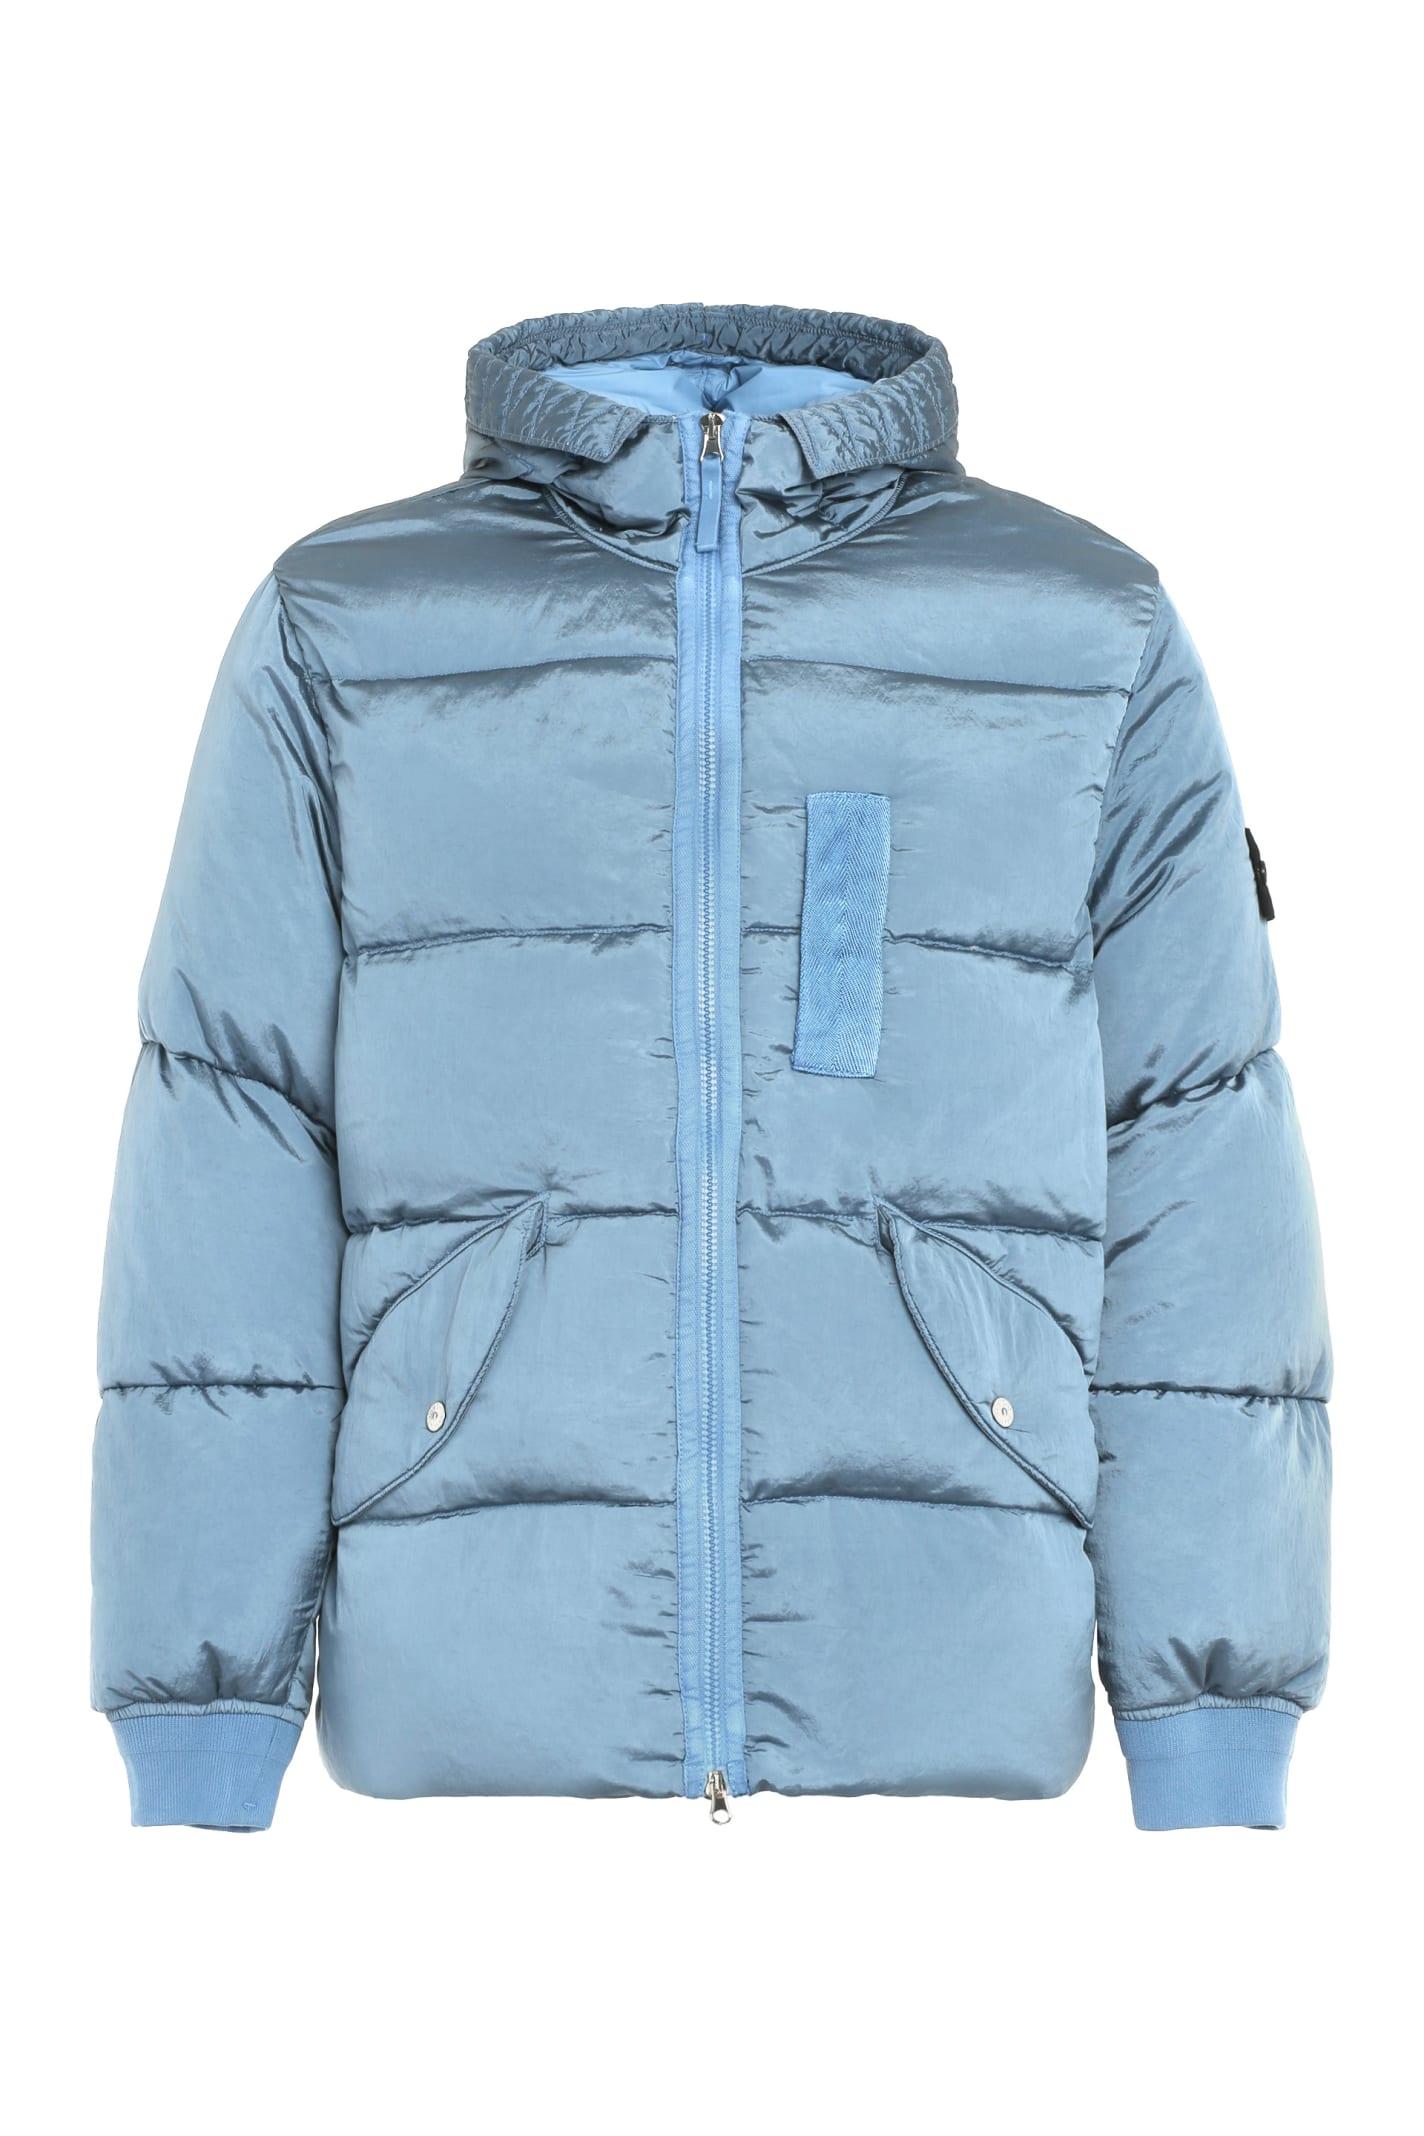 Stone Island Hooded Down Jacket in Blue for Men | Lyst